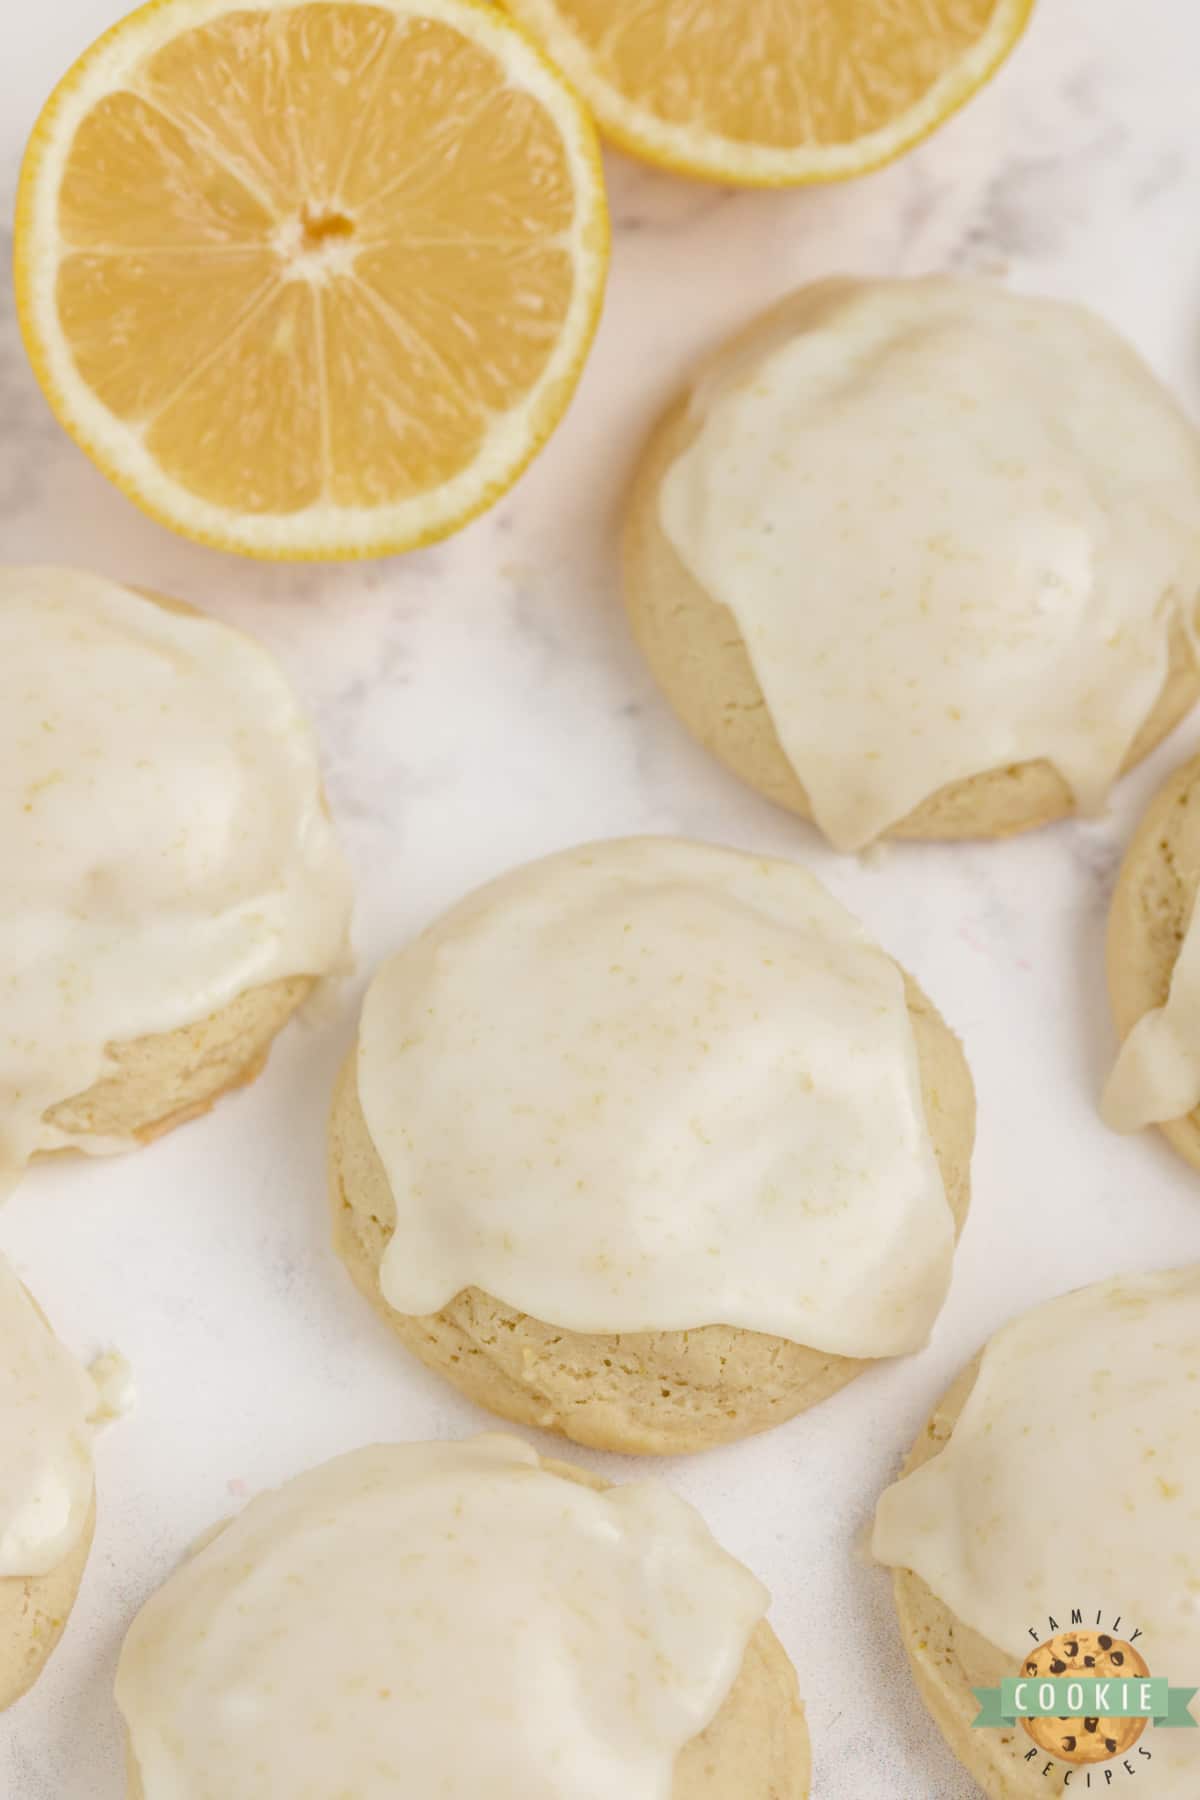 Lemon Cream Cheese Cookies are soft, thick and packed with lemon flavor! This lemon cookie recipe is made with cream cheese, lemon juice and lemon zest and then topped with a simple lemon glaze.  